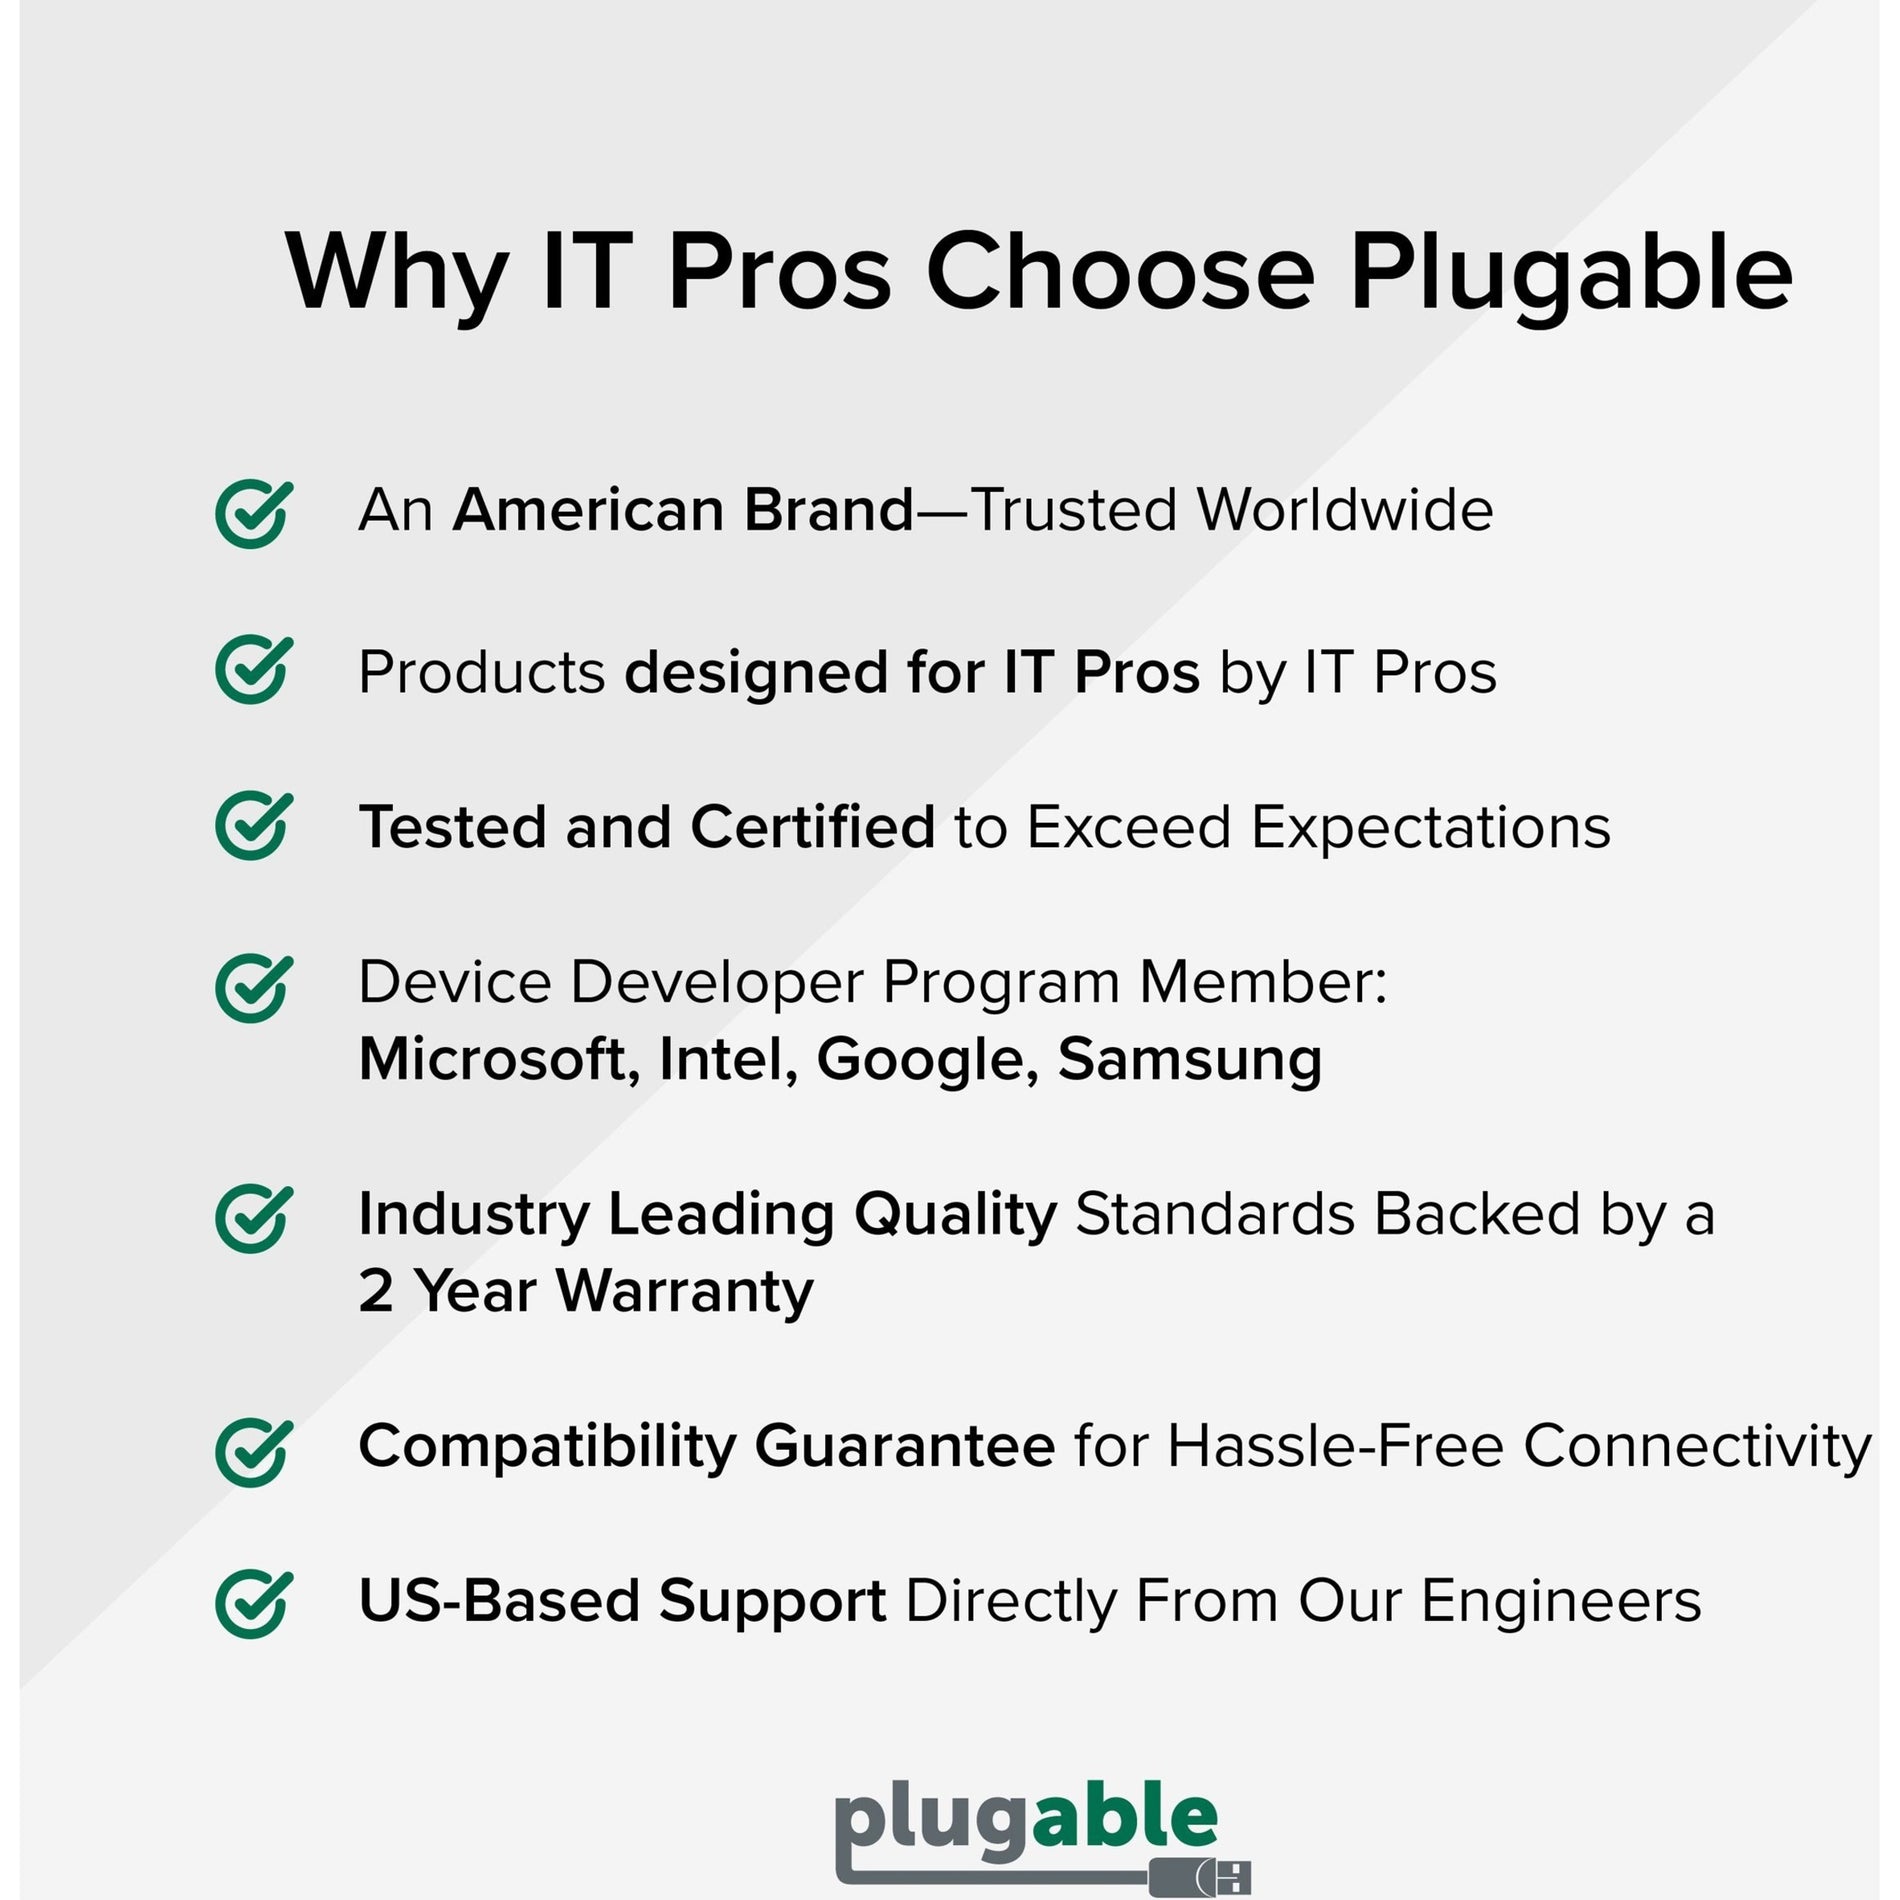 Plugable USB2-5M USB 2.0 Active Extension Cable (5m/16ft), 480 Mbit/s Data Transfer Rate, Shielded